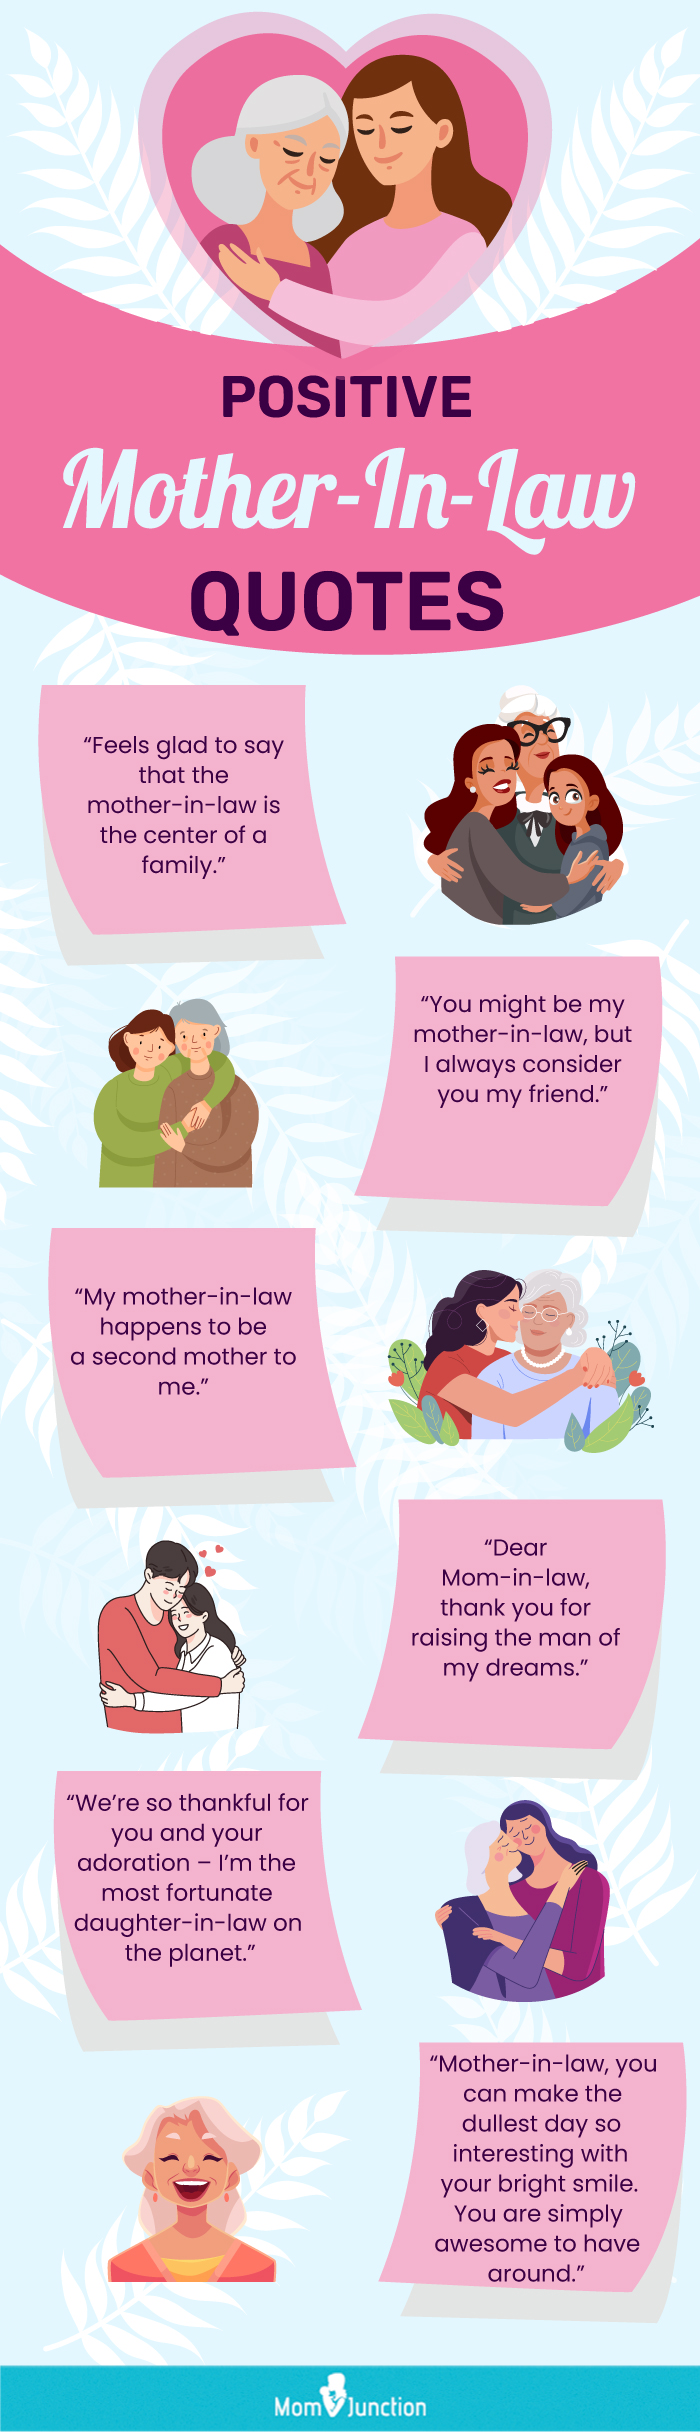 100 Best Positive Quotes About Mother-In-law